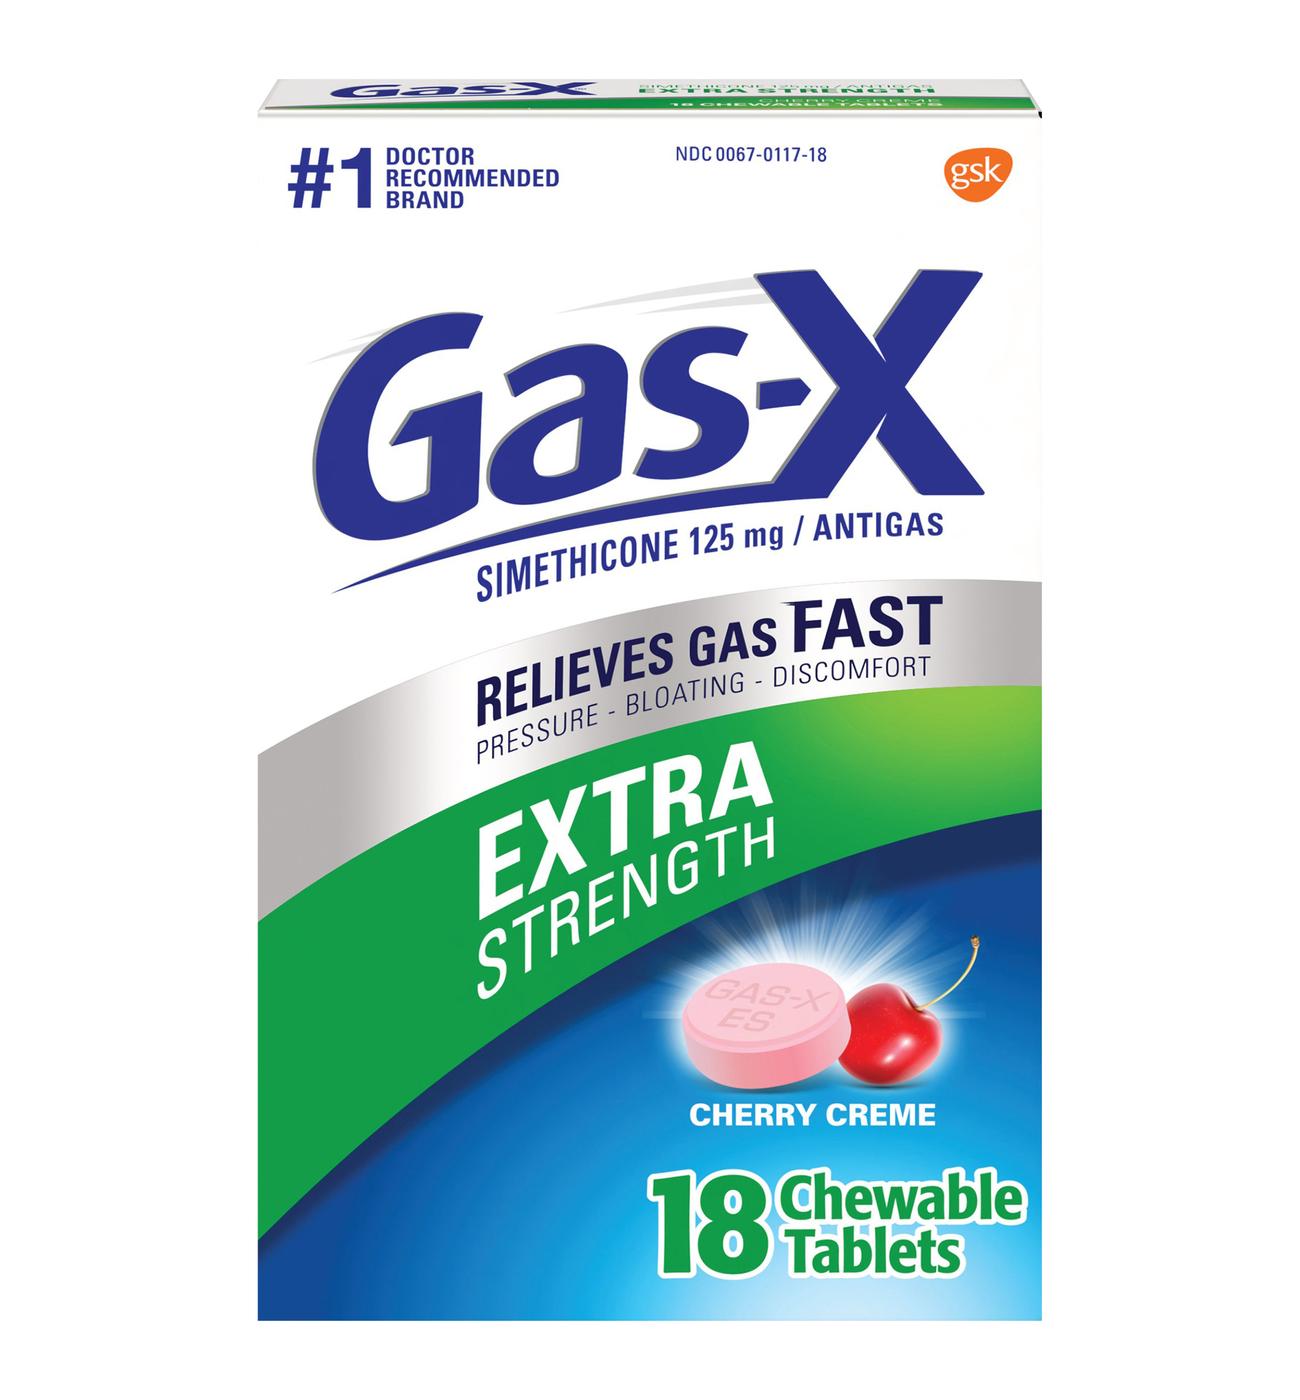 Gas-X Extra Strength Chewable Tablets - Cherry Creme; image 1 of 8